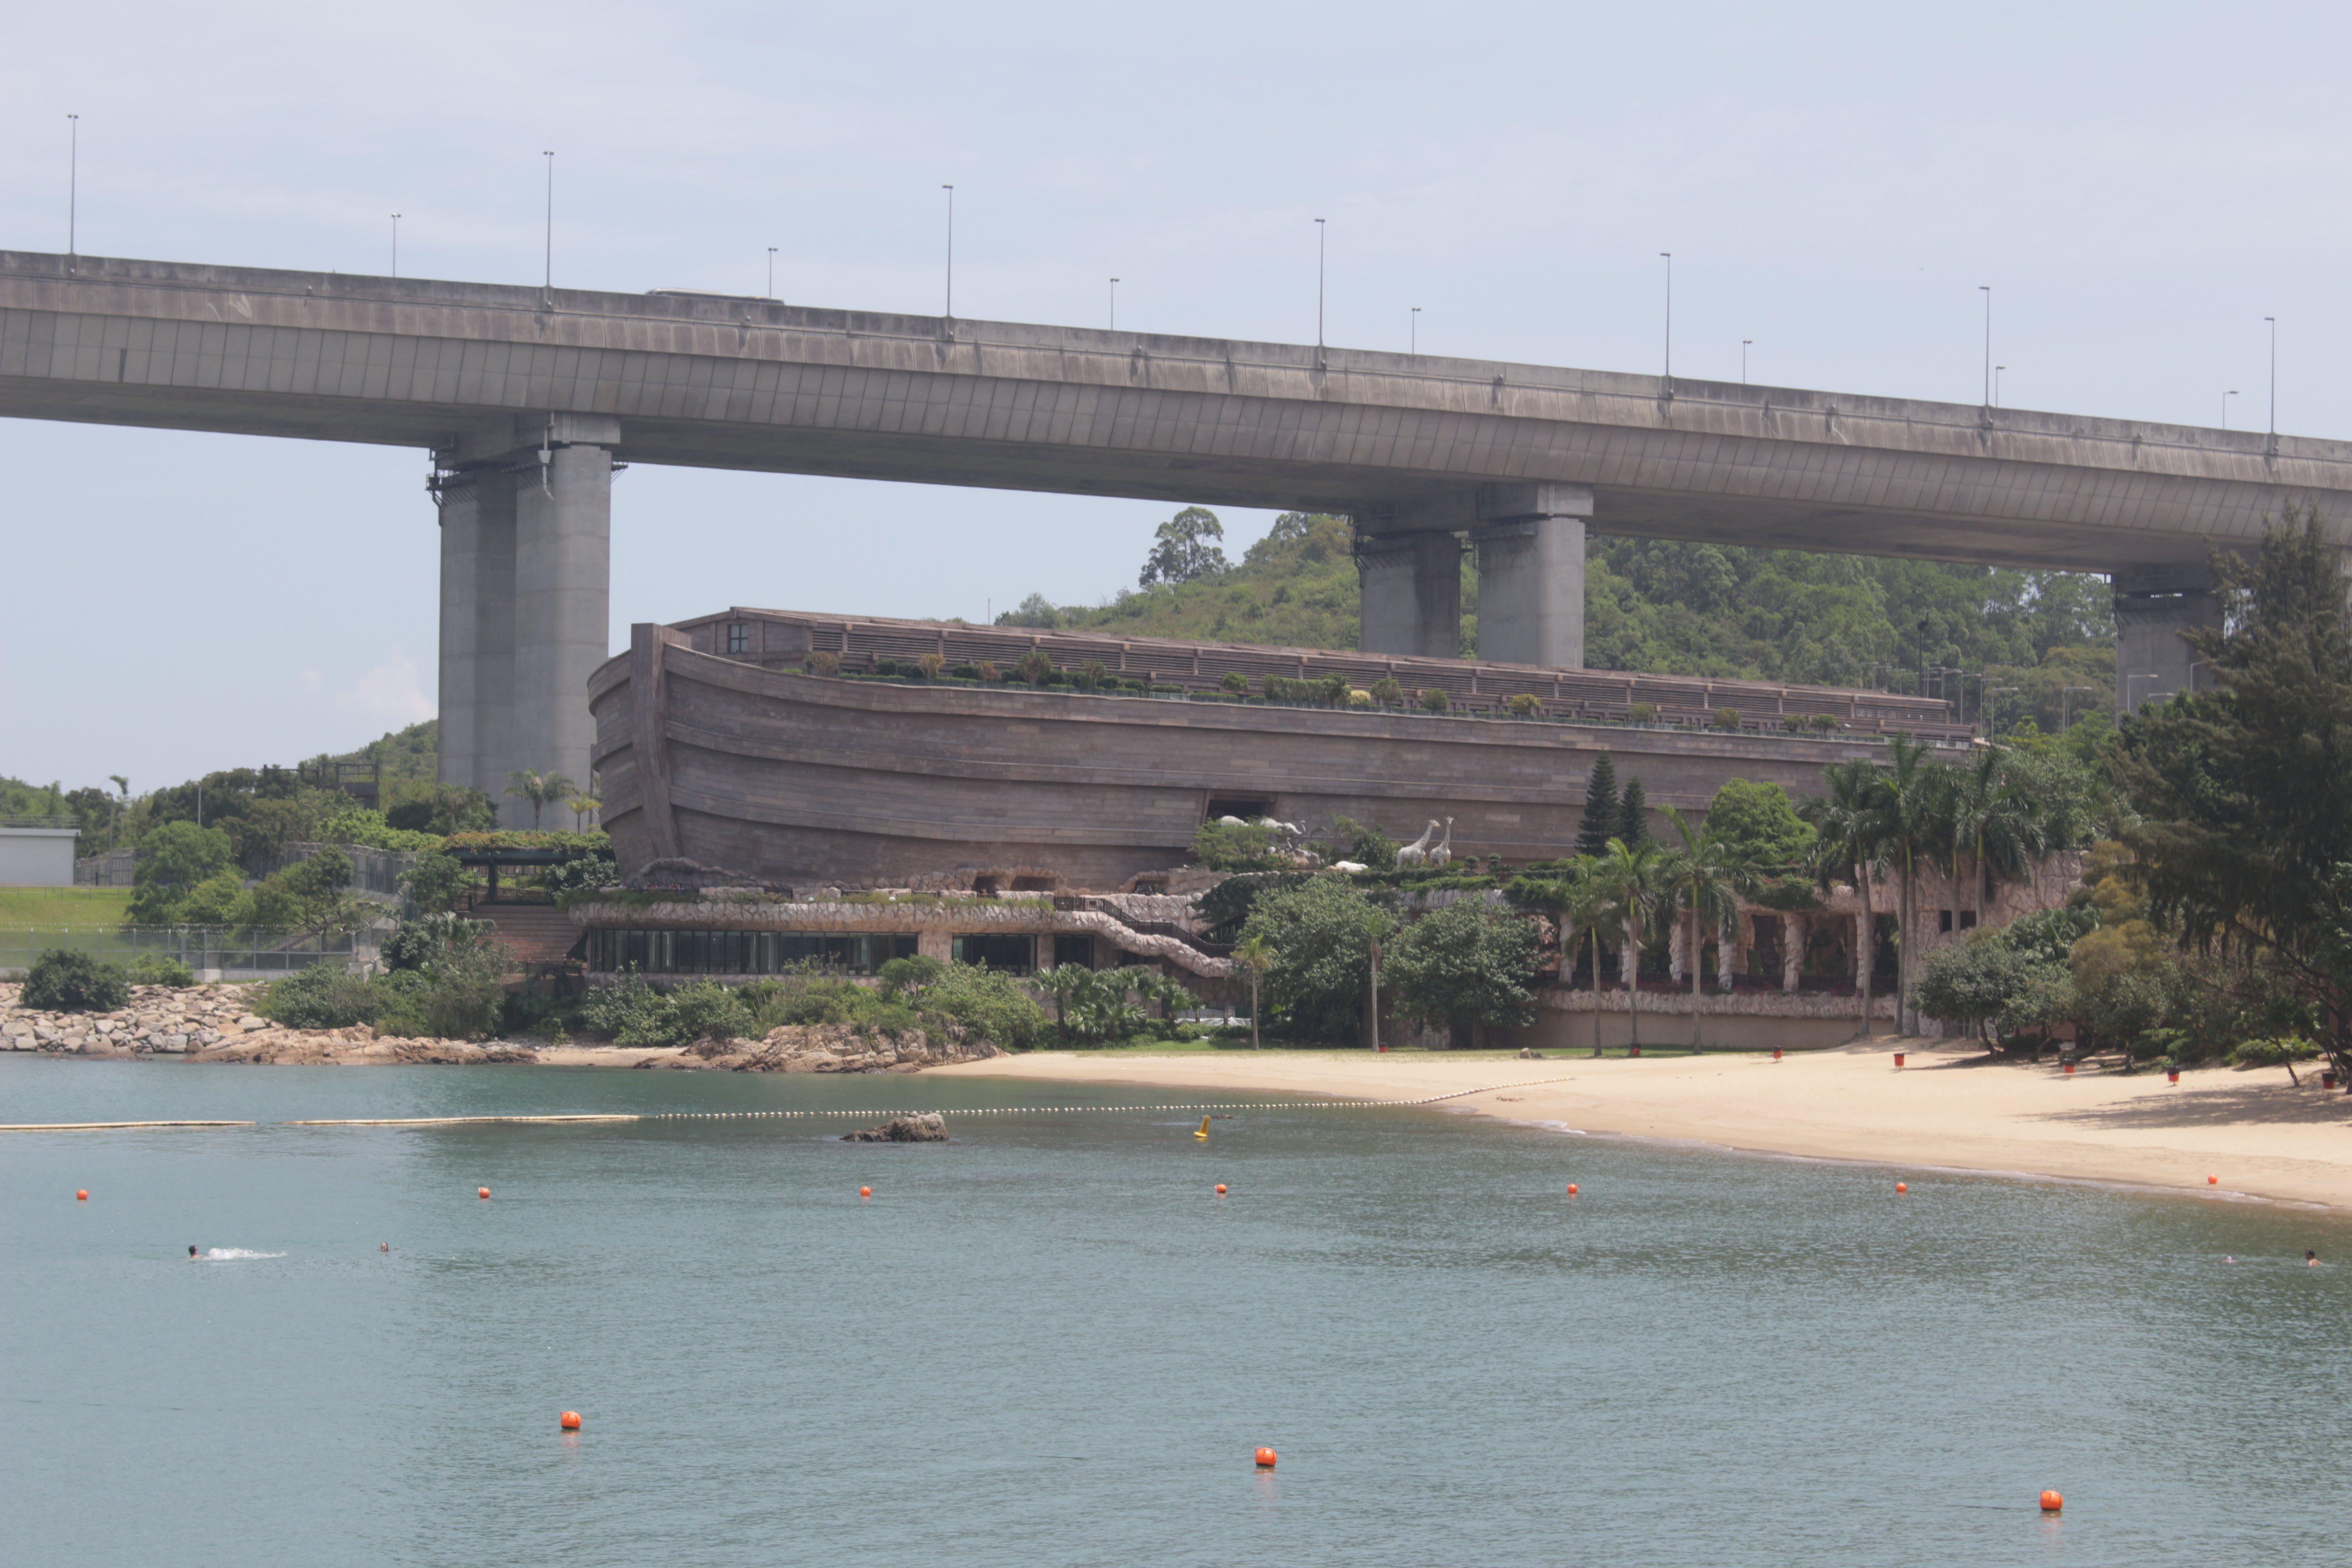 Noah’s Ark and the Tsing Ma suspension bridge as seen from the Park Island ferry pier. Photo by Vicky Wong.